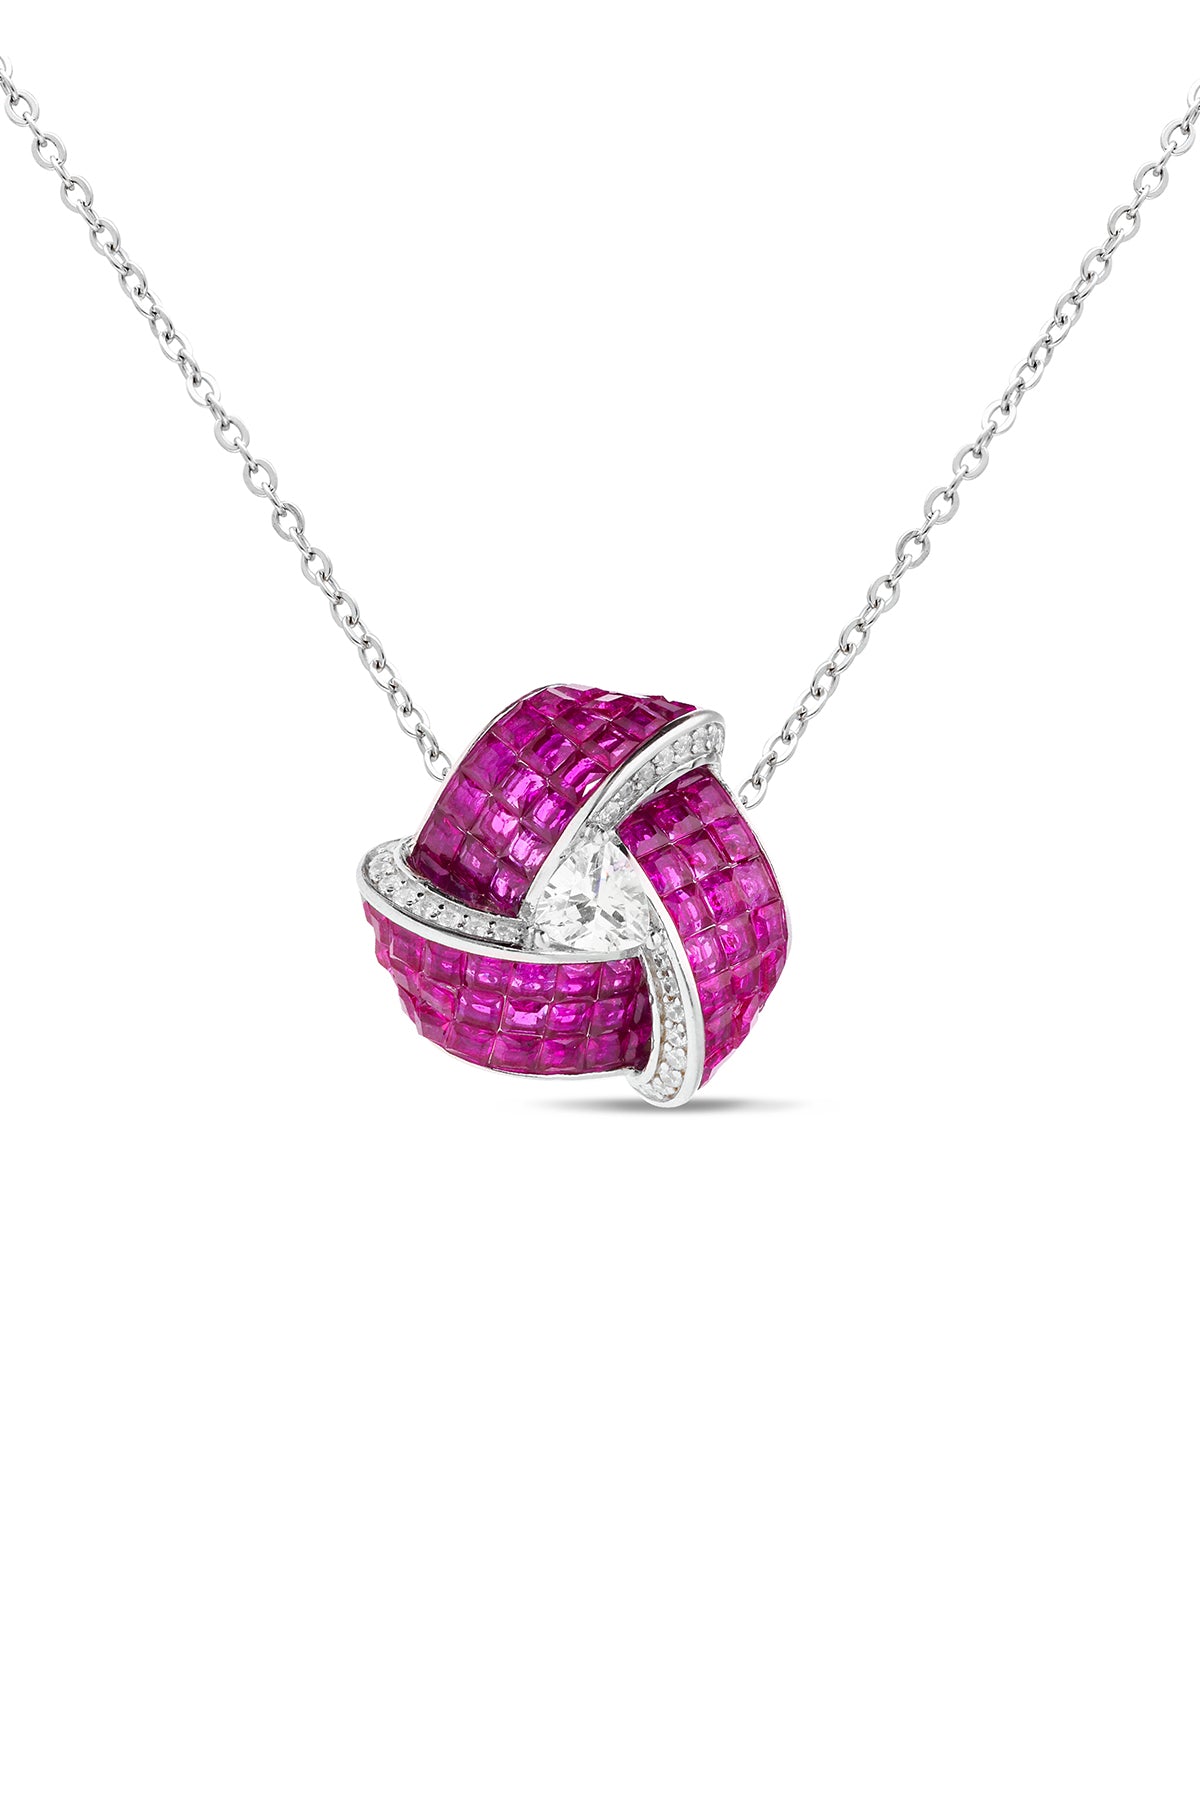 Enchanted Ruby Triad Blossom Pendant with Chain